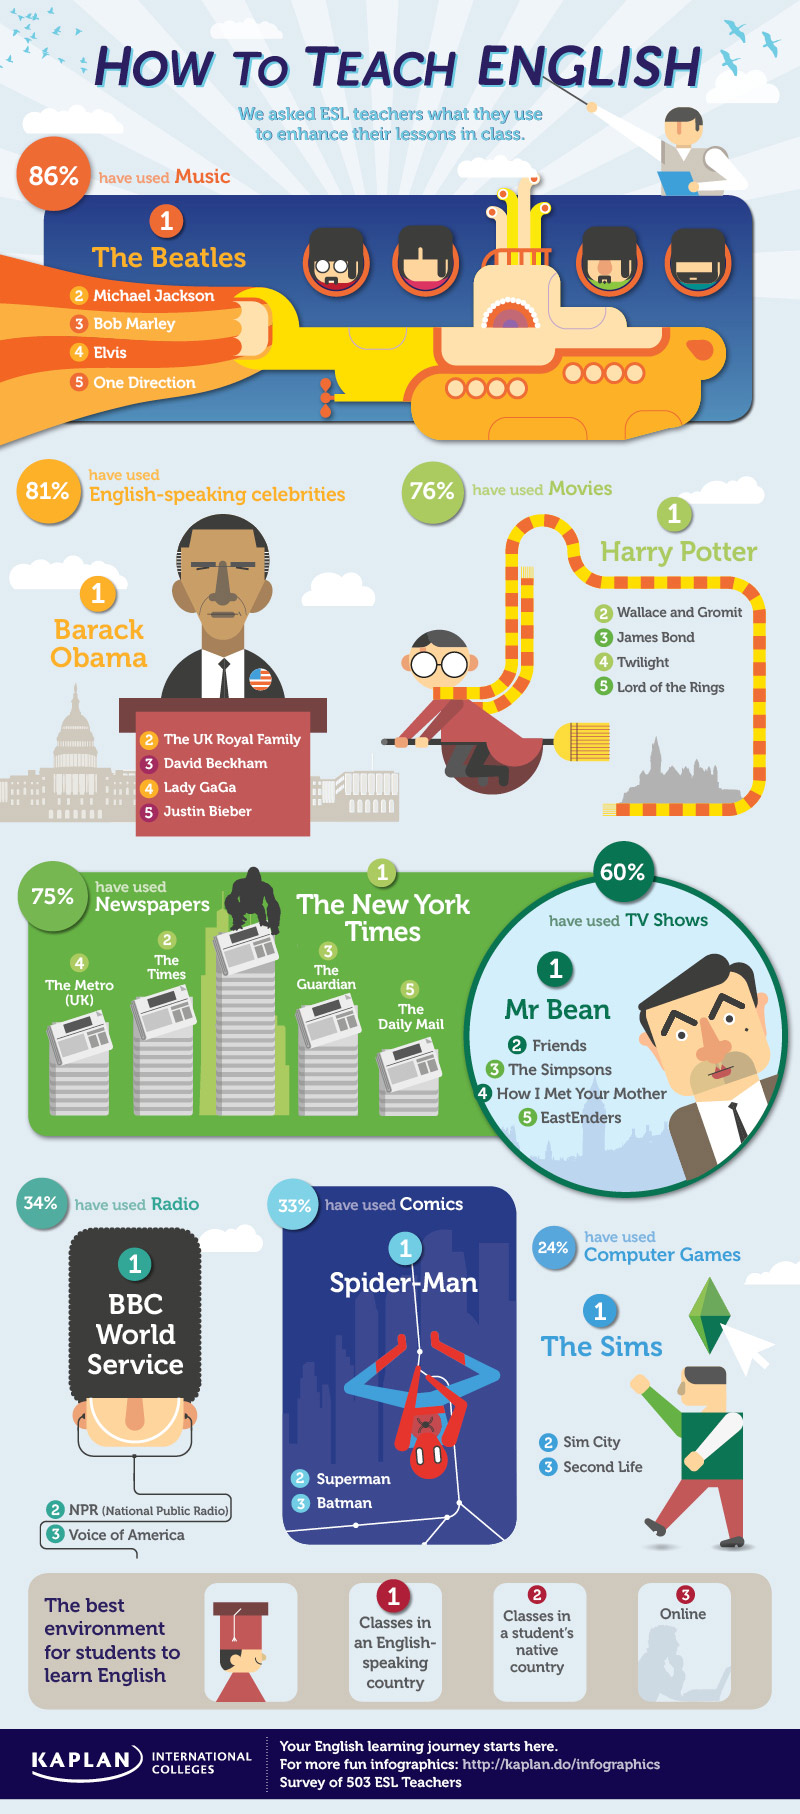 how-to-teach-english-infographic-american-tesol-institute-s-lexical